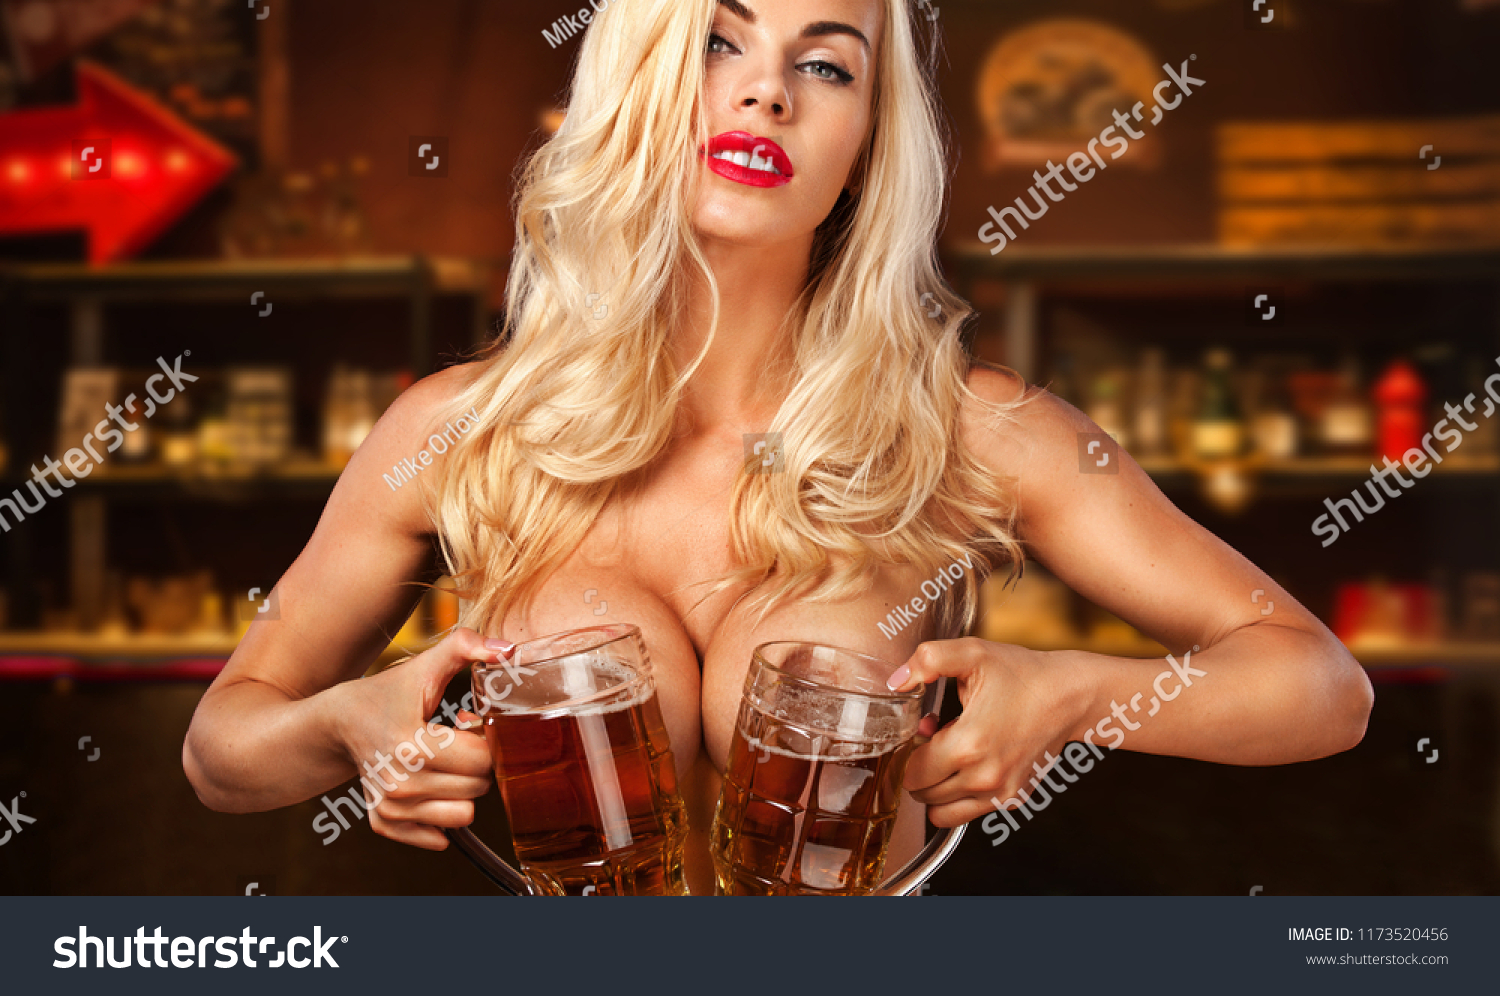 https://image.shutterstock.com/z/stock-photo-oktoberfest-beer-fest-young-sexy-and-naked-woman-serving-big-mugs-in-the-bar-1173520456.jpg